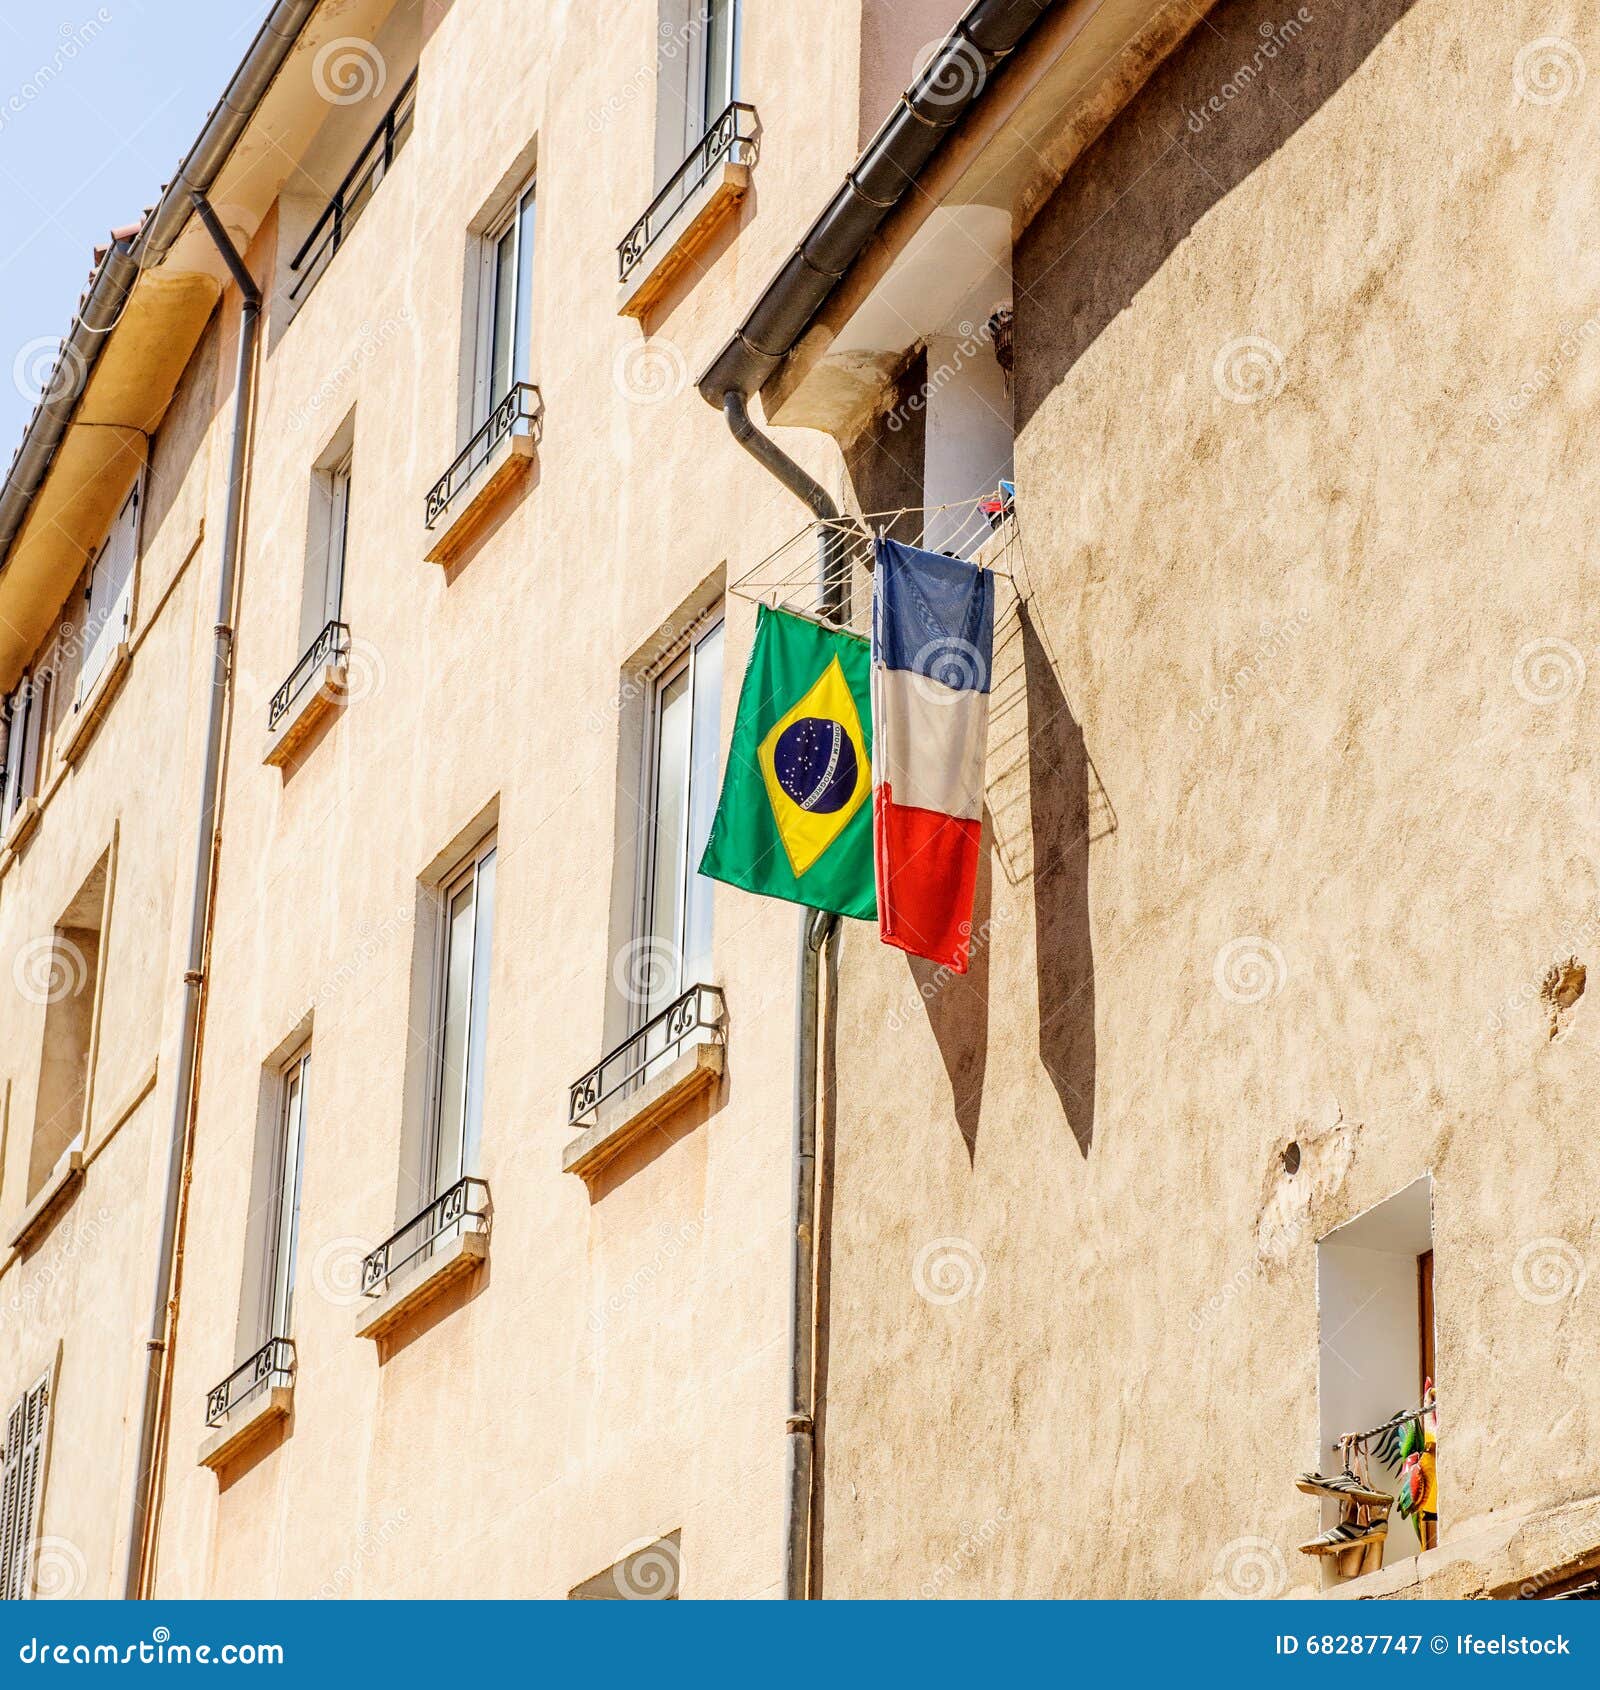 French And Brazilian Flag Hanged Outside The Window In The City